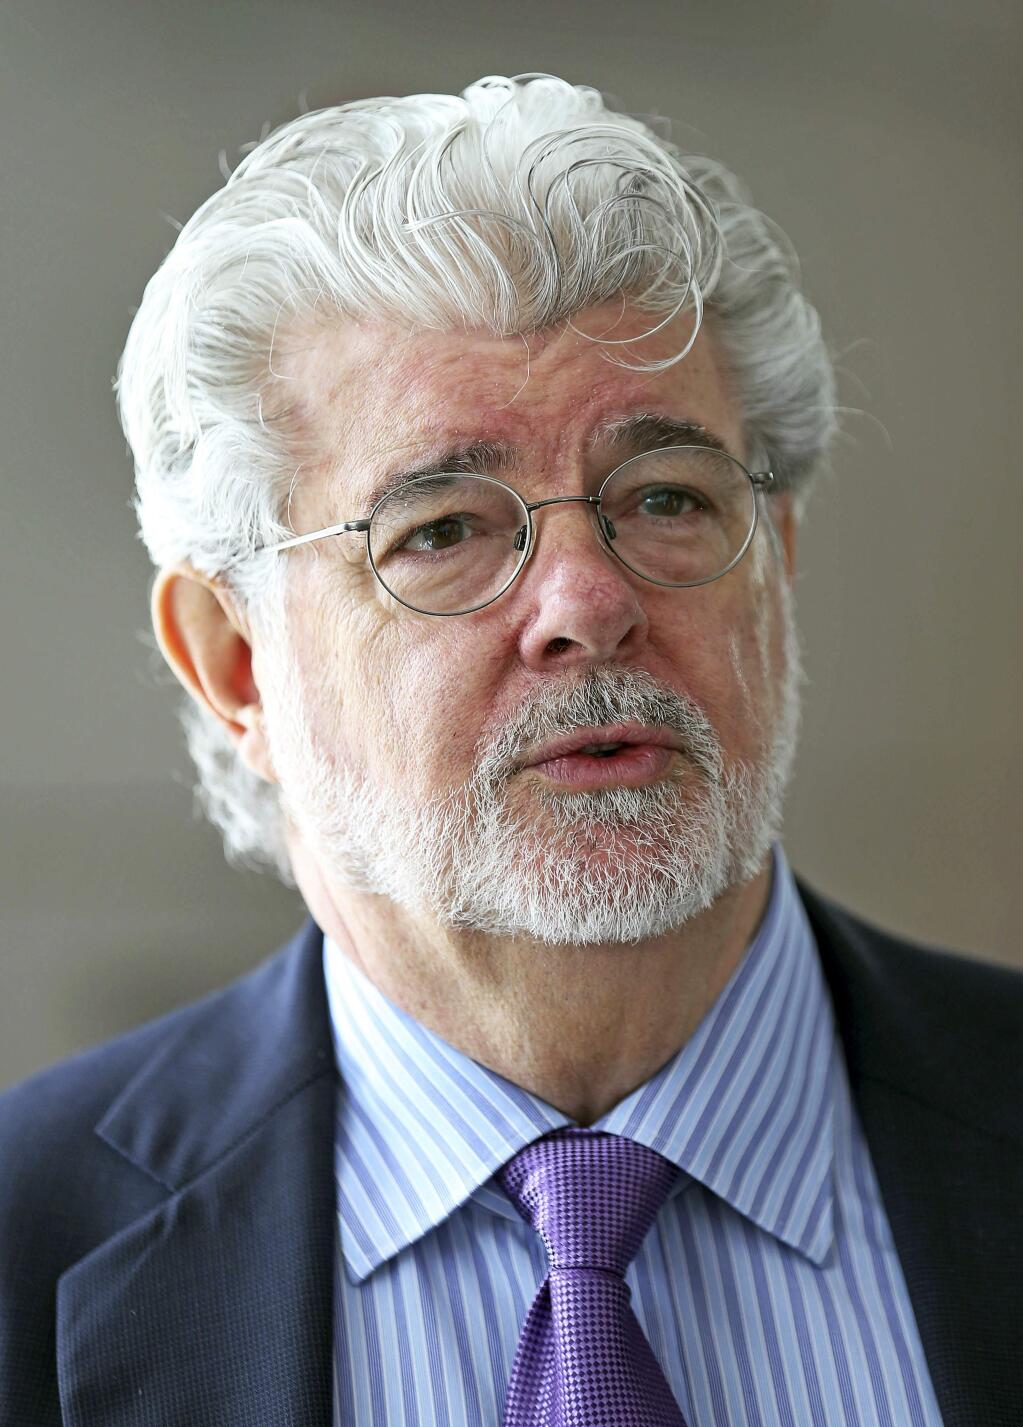 FILE - In this Jan. 16, 2014 file photo, George Lucas speaks at an event in Singapore. 'Star Wars' creator Lucas and his team announced Tuesday, Jan. 10, 2017, they have chosen Los Angeles over San Francisco as the home of the museum that will showcase his work. After what organizers called an extremely difficult decision, they announced Tuesday that the museum will be built in Exposition Park in Los Angeles, where it will sit alongside other more traditional museums. (AP Photo/Wong Maye-E, File)